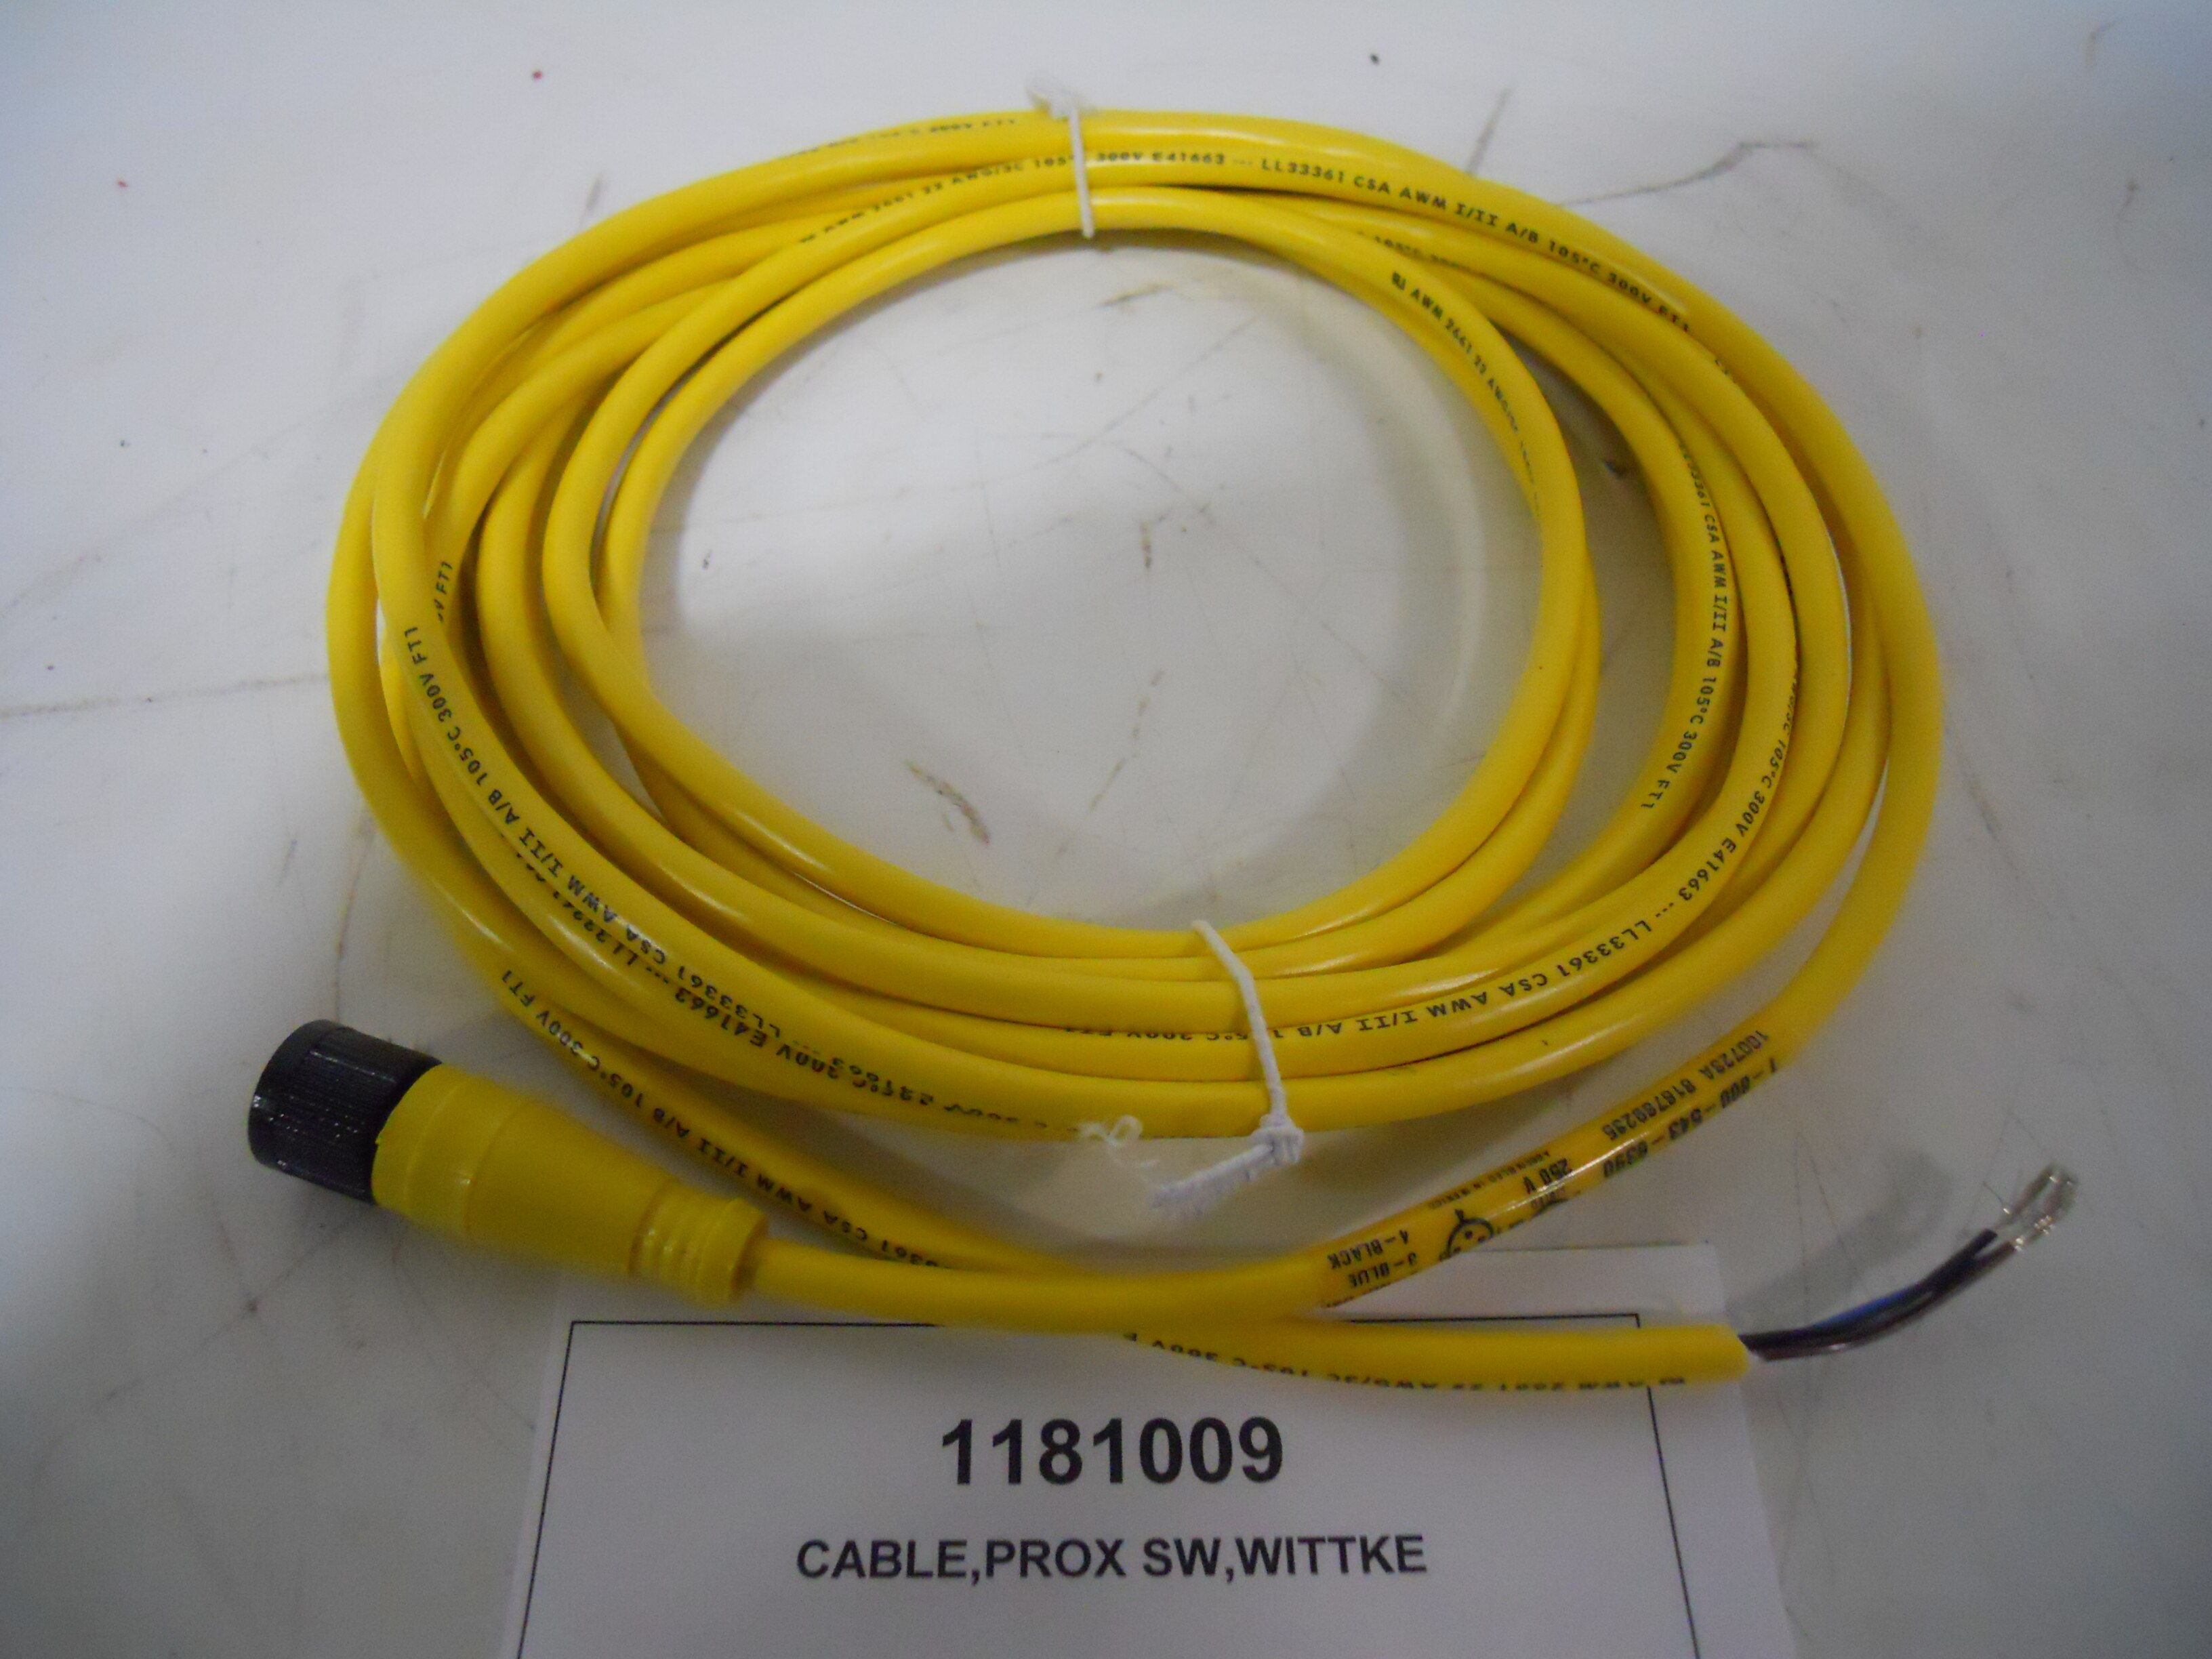 CABLE,PROX SW,WITTKE